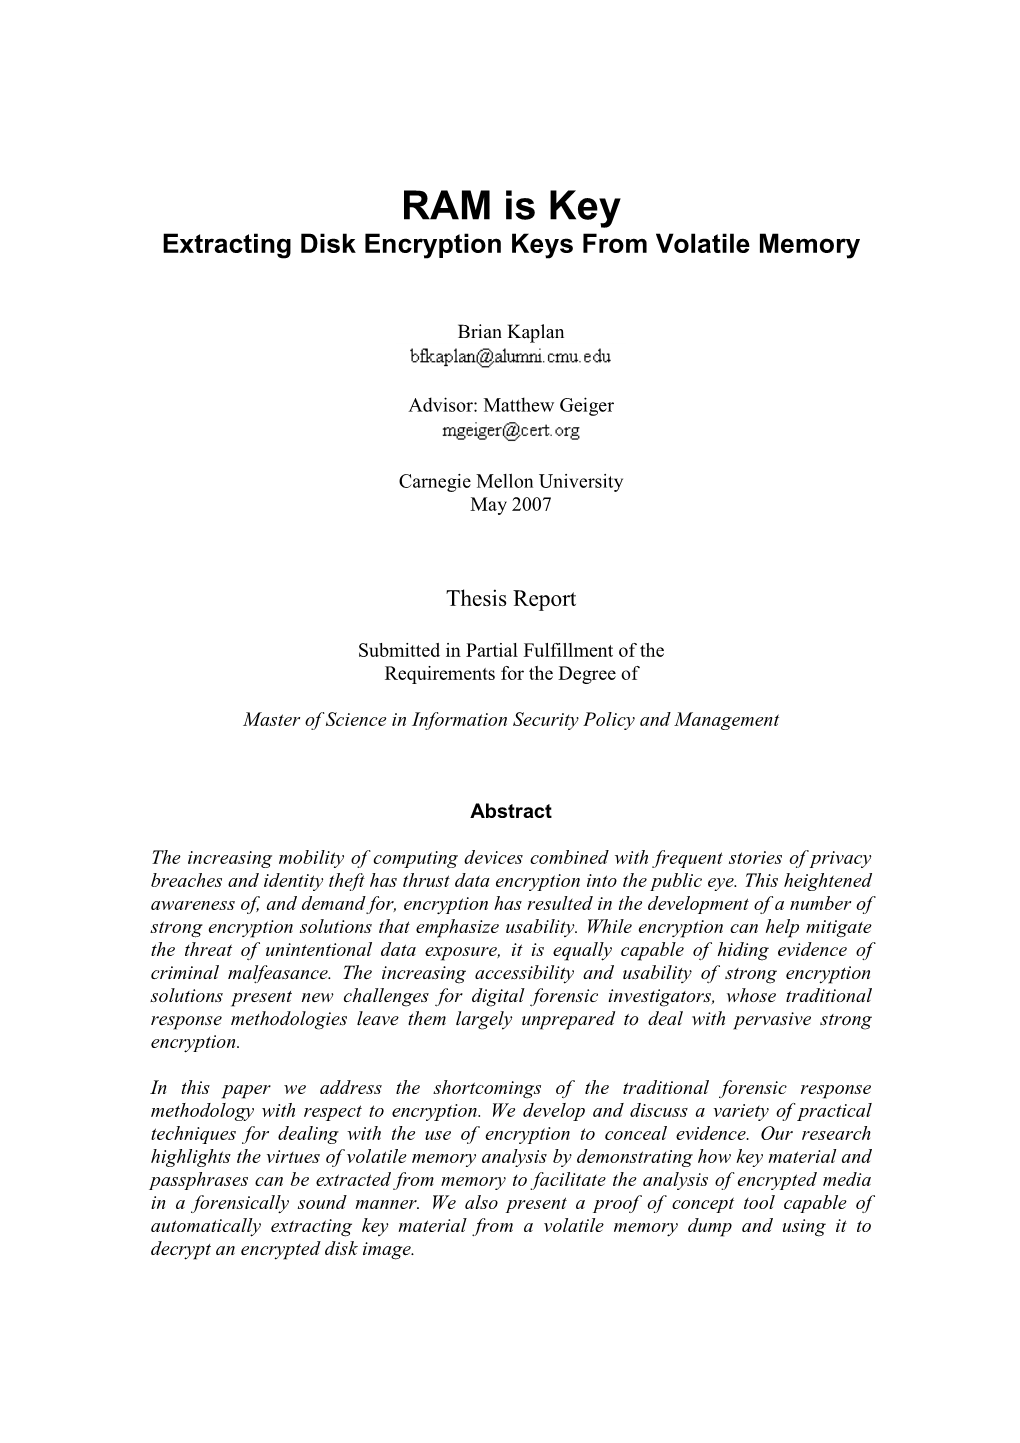 Extracting Disk Encryption Keys from Volatile Memory